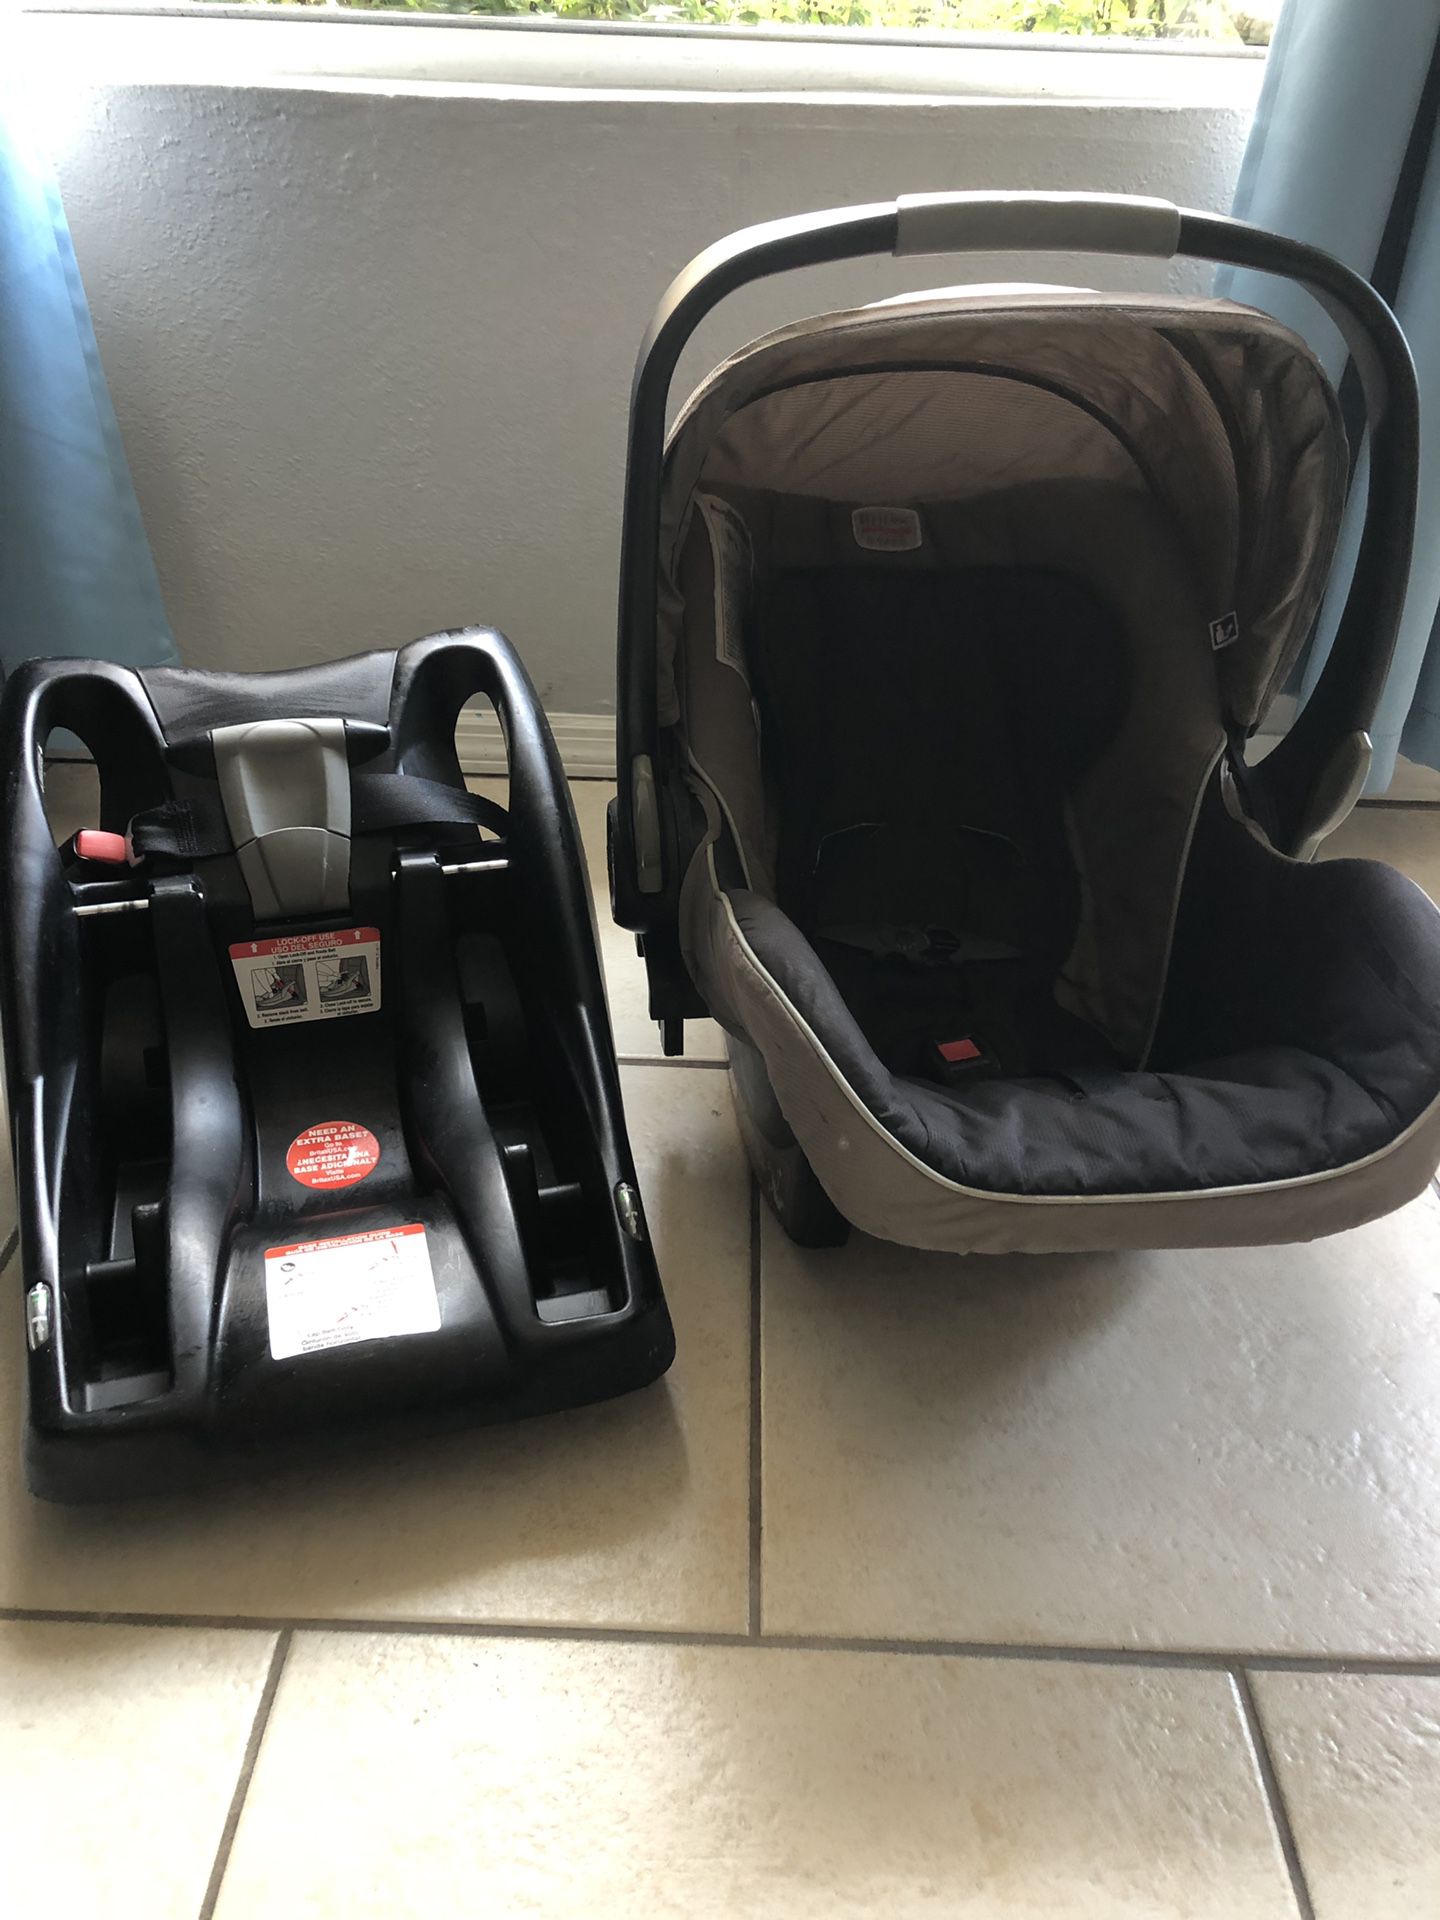 Britax infant car seat and base